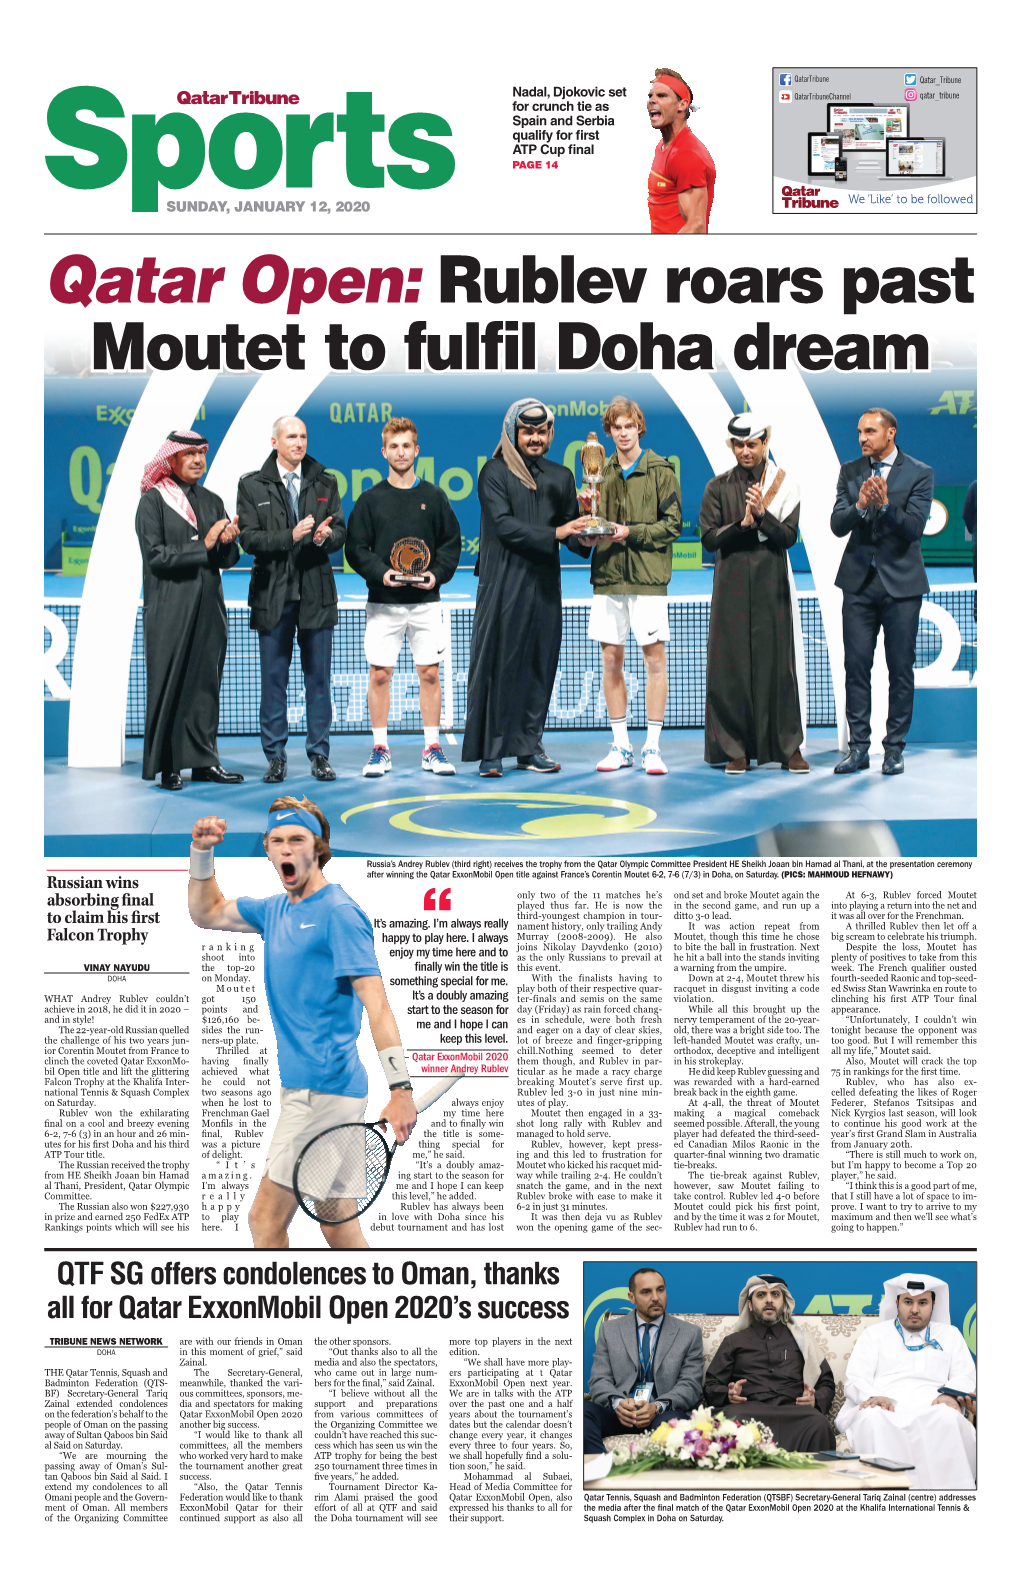 Rublev Roars Past Moutet to Fulfil Doha Dream